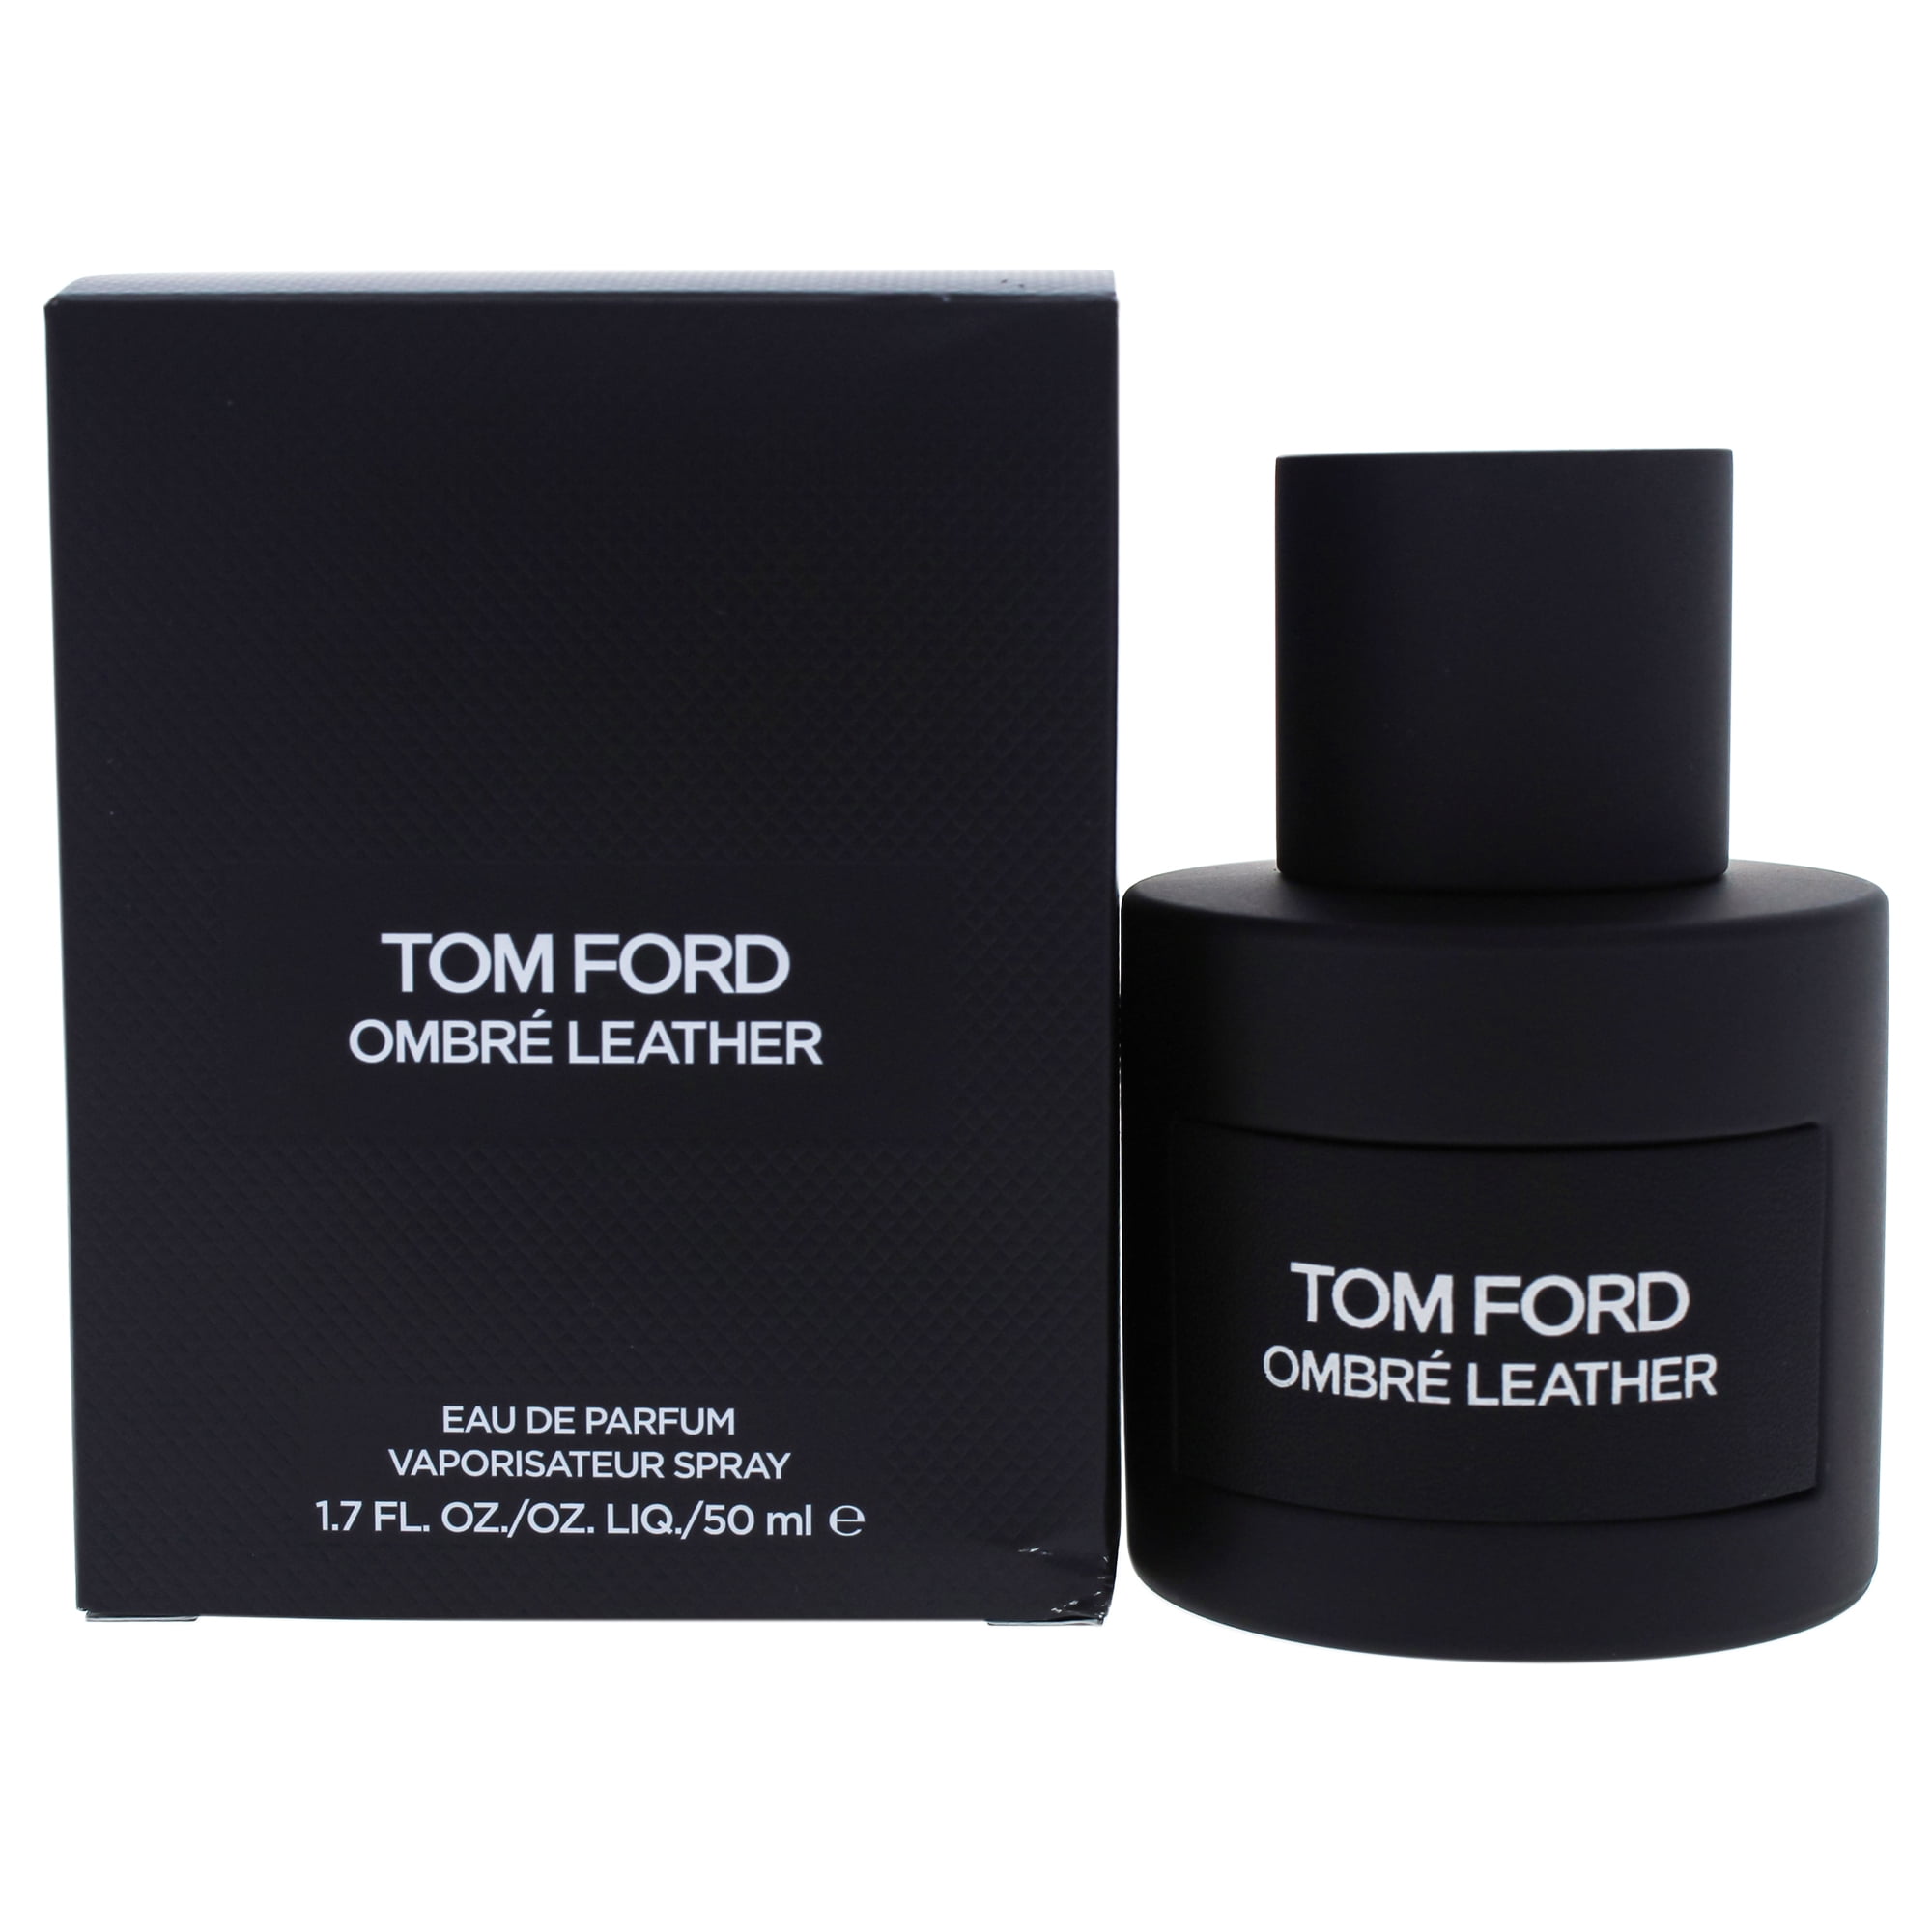 Tom Ford Unisex Ombre Leather EDP Spray 1.7 oz Fragrances 888066075138 -  Fragrances & Beauty, Ombre Leather - Jomashop